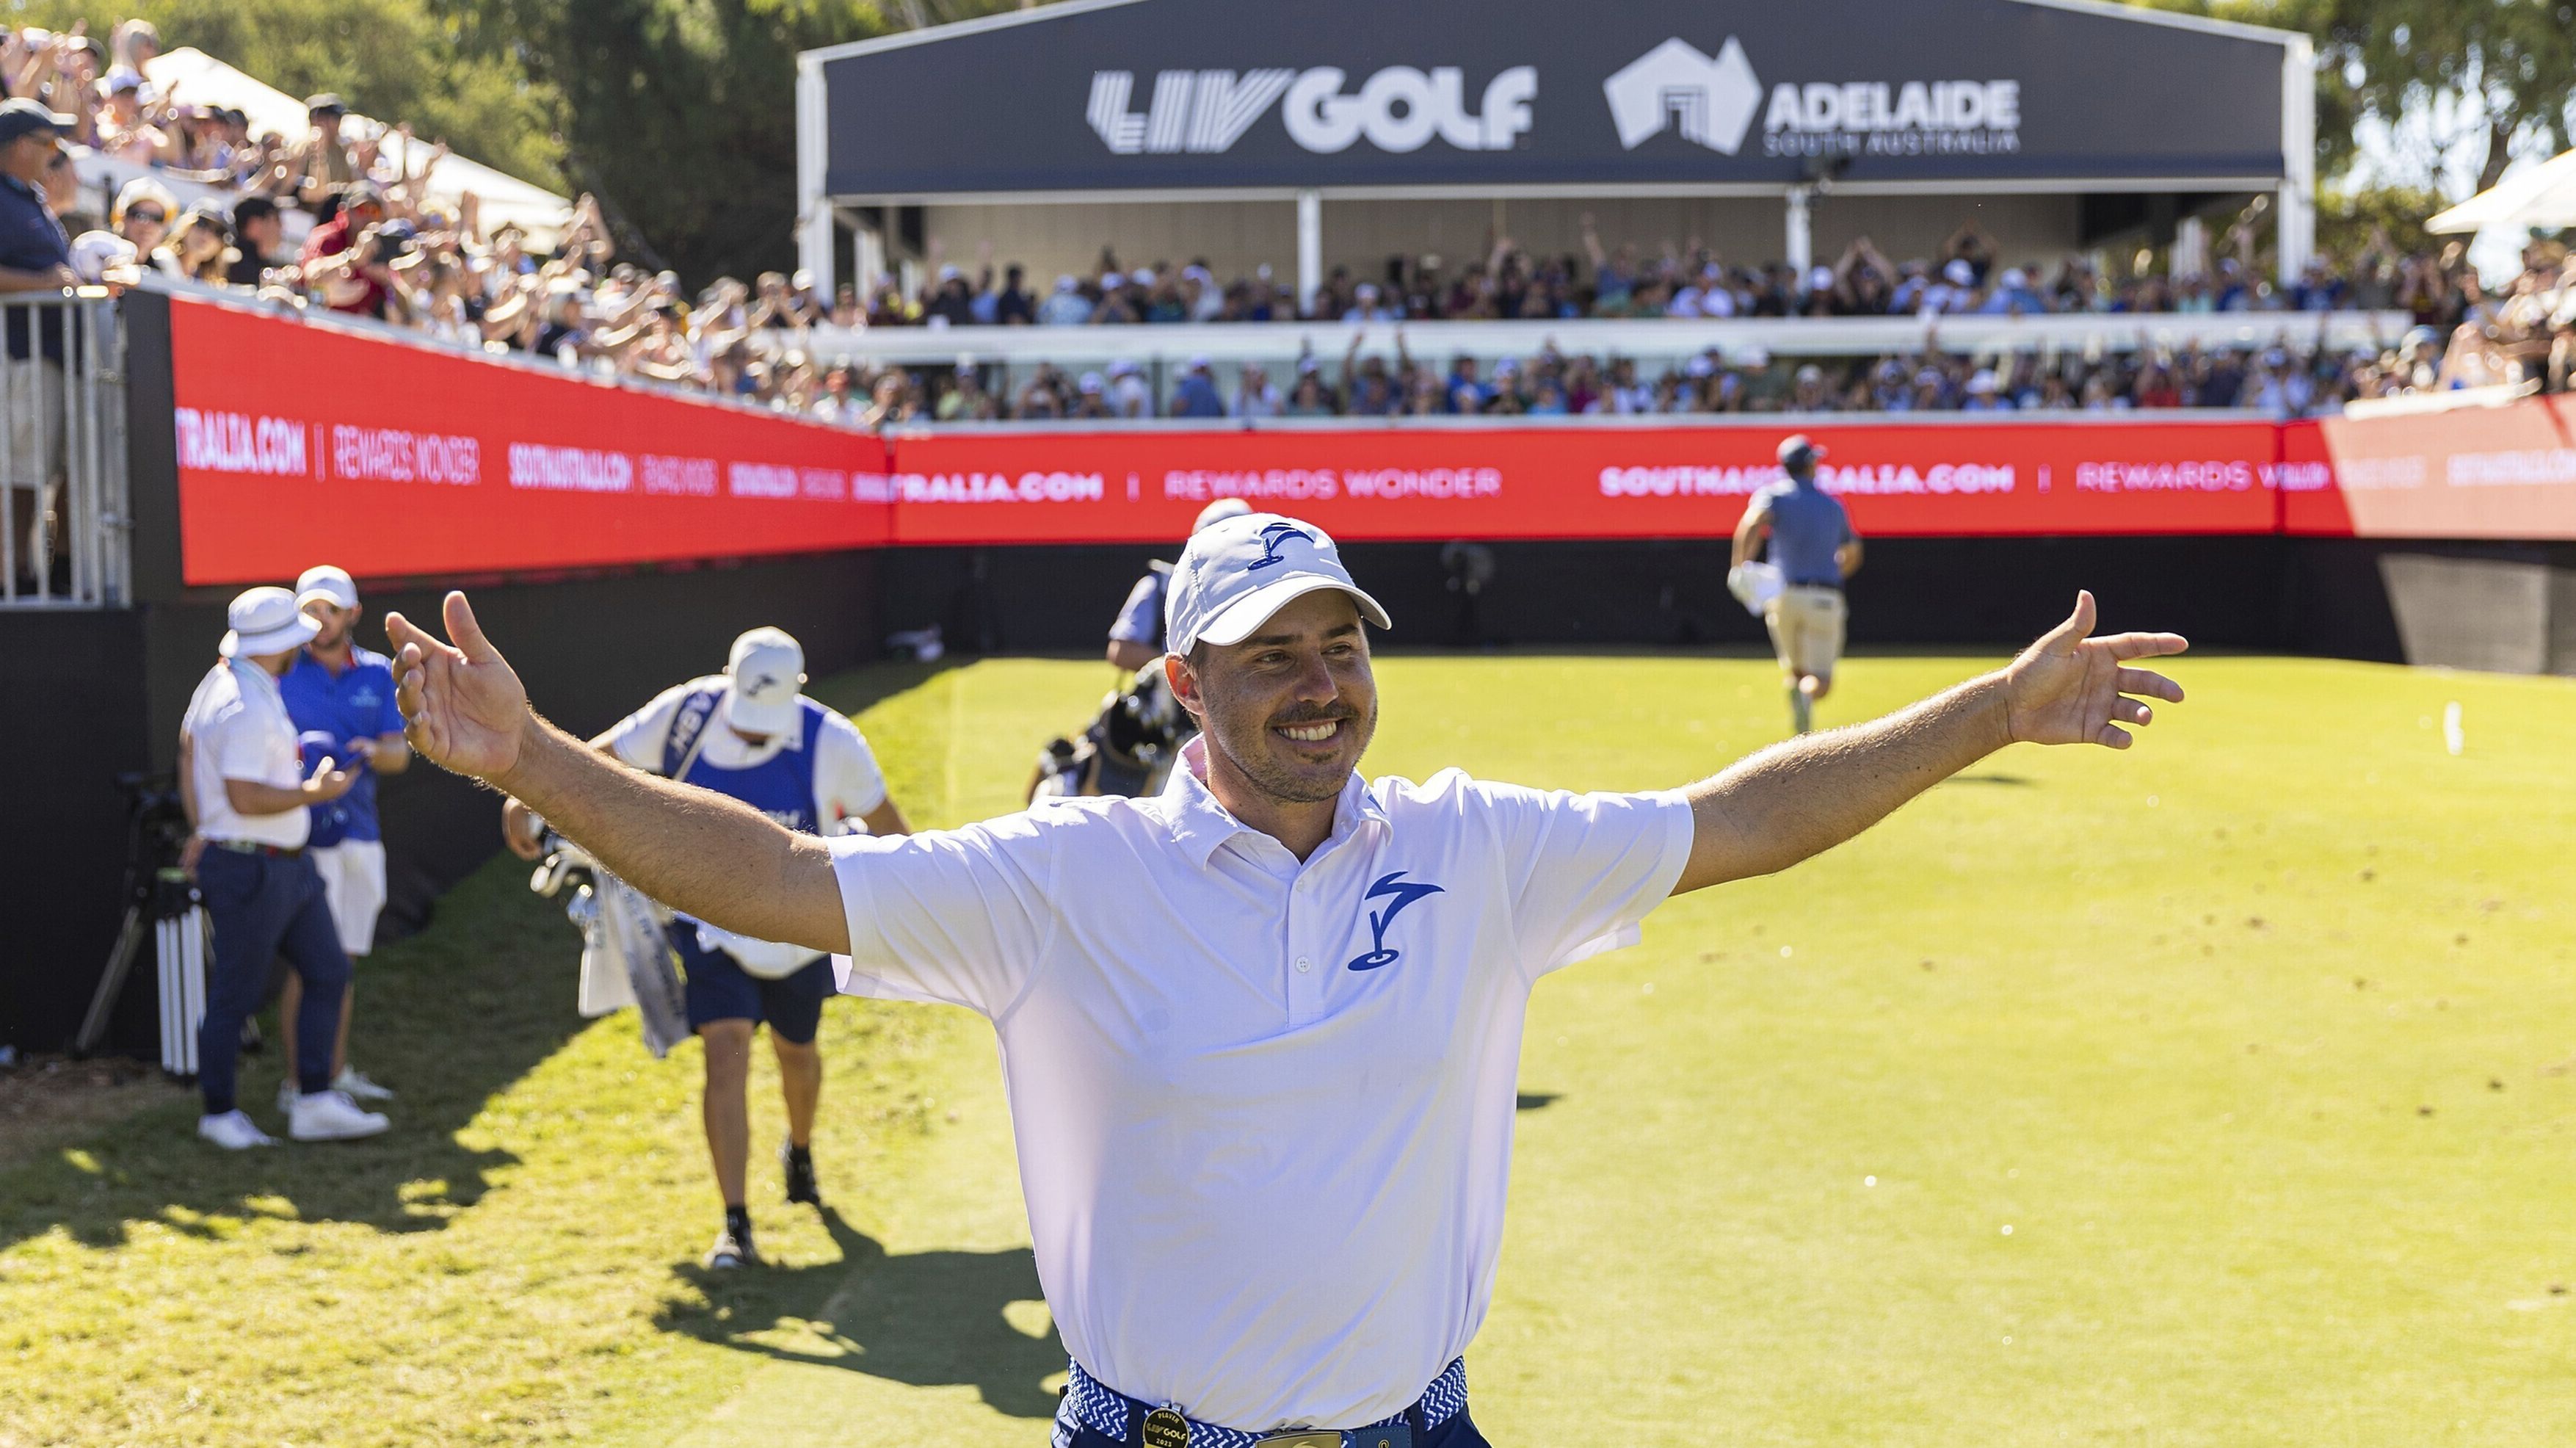 Chase Koepka reacts after making a hole-in-one on the 12th hole during the final round of LIV Golf Adelaide.